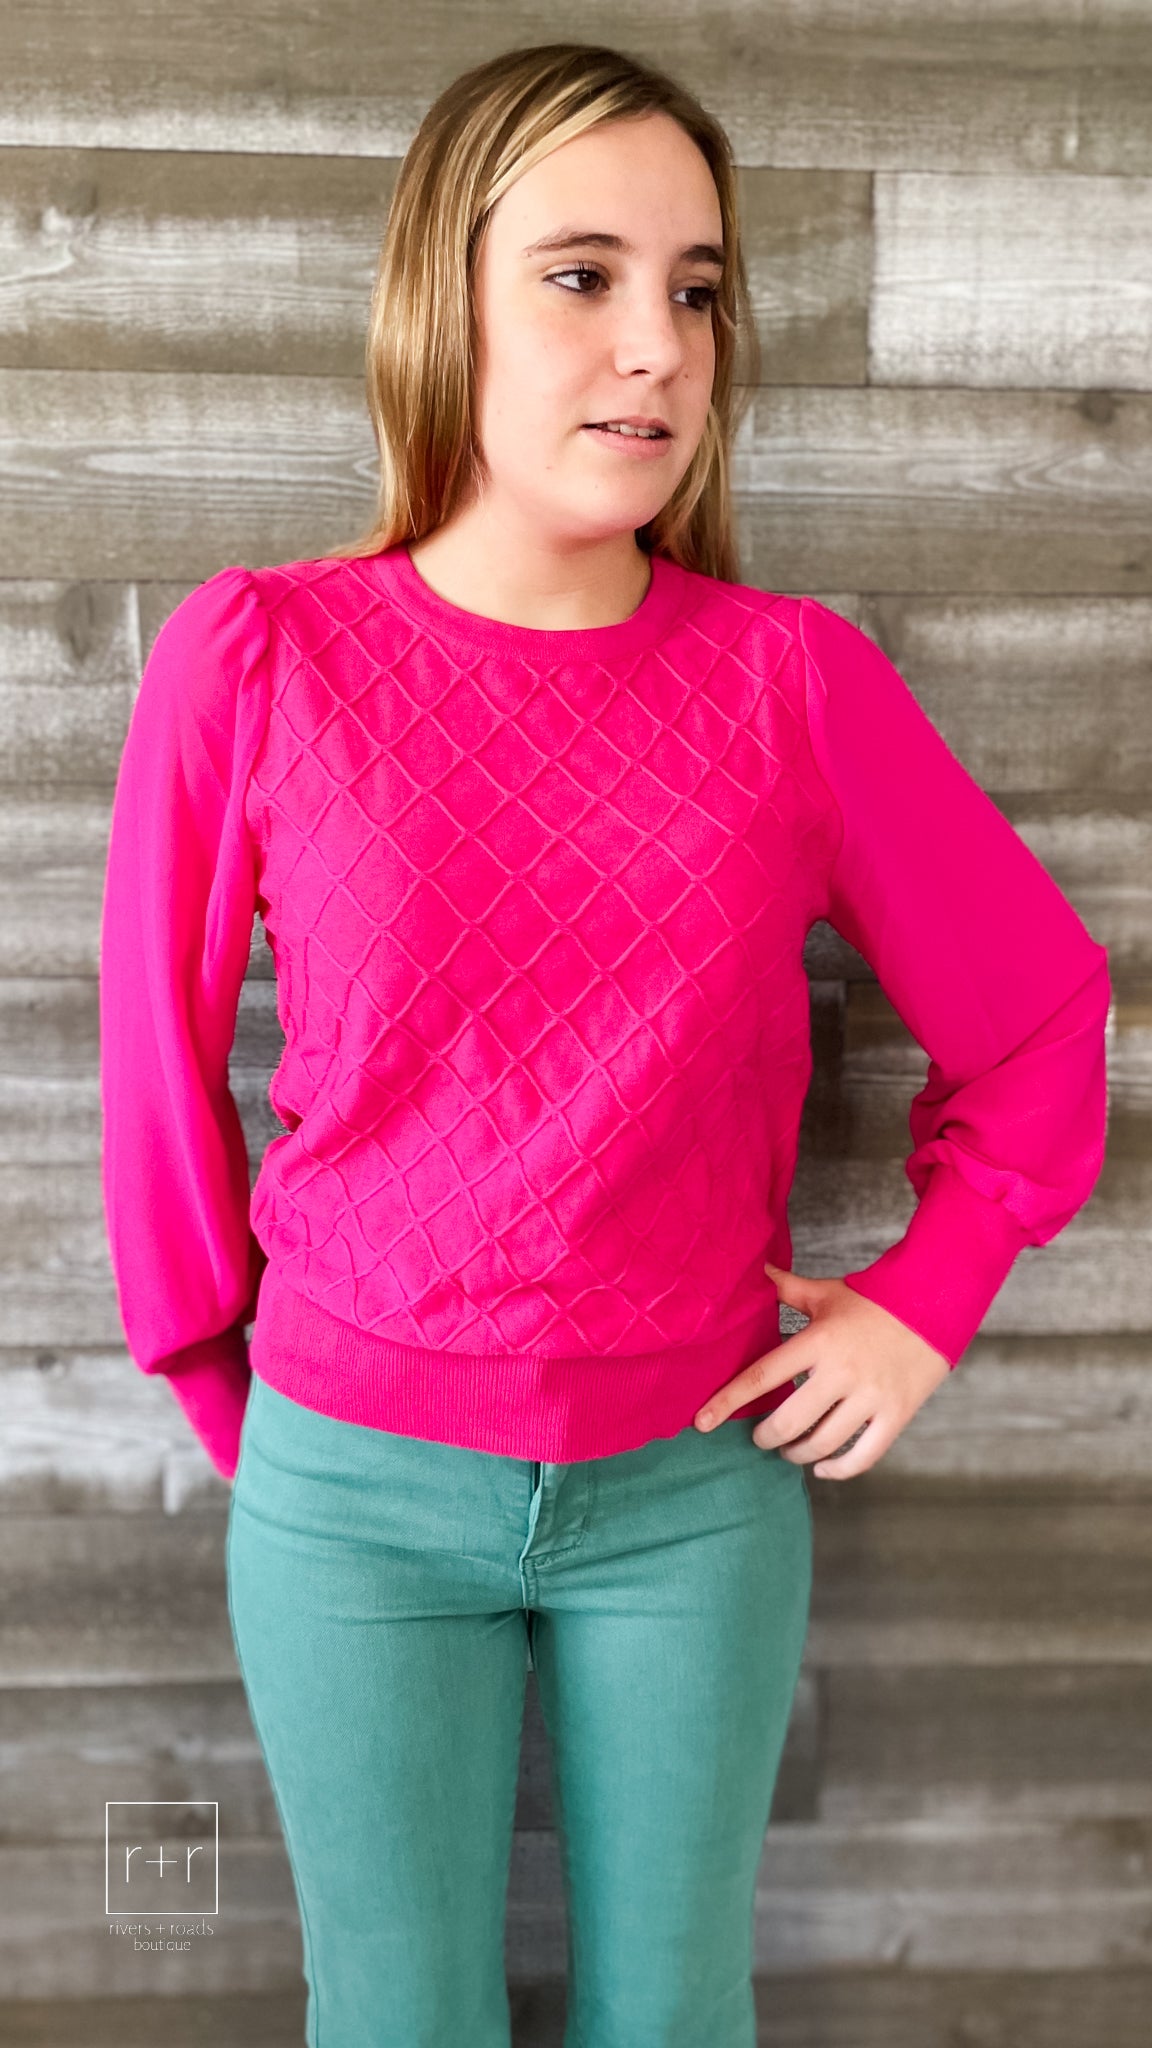 jodifl mixed fabric cotton sweater with sheer peasant sleeves G10817 viva magenta